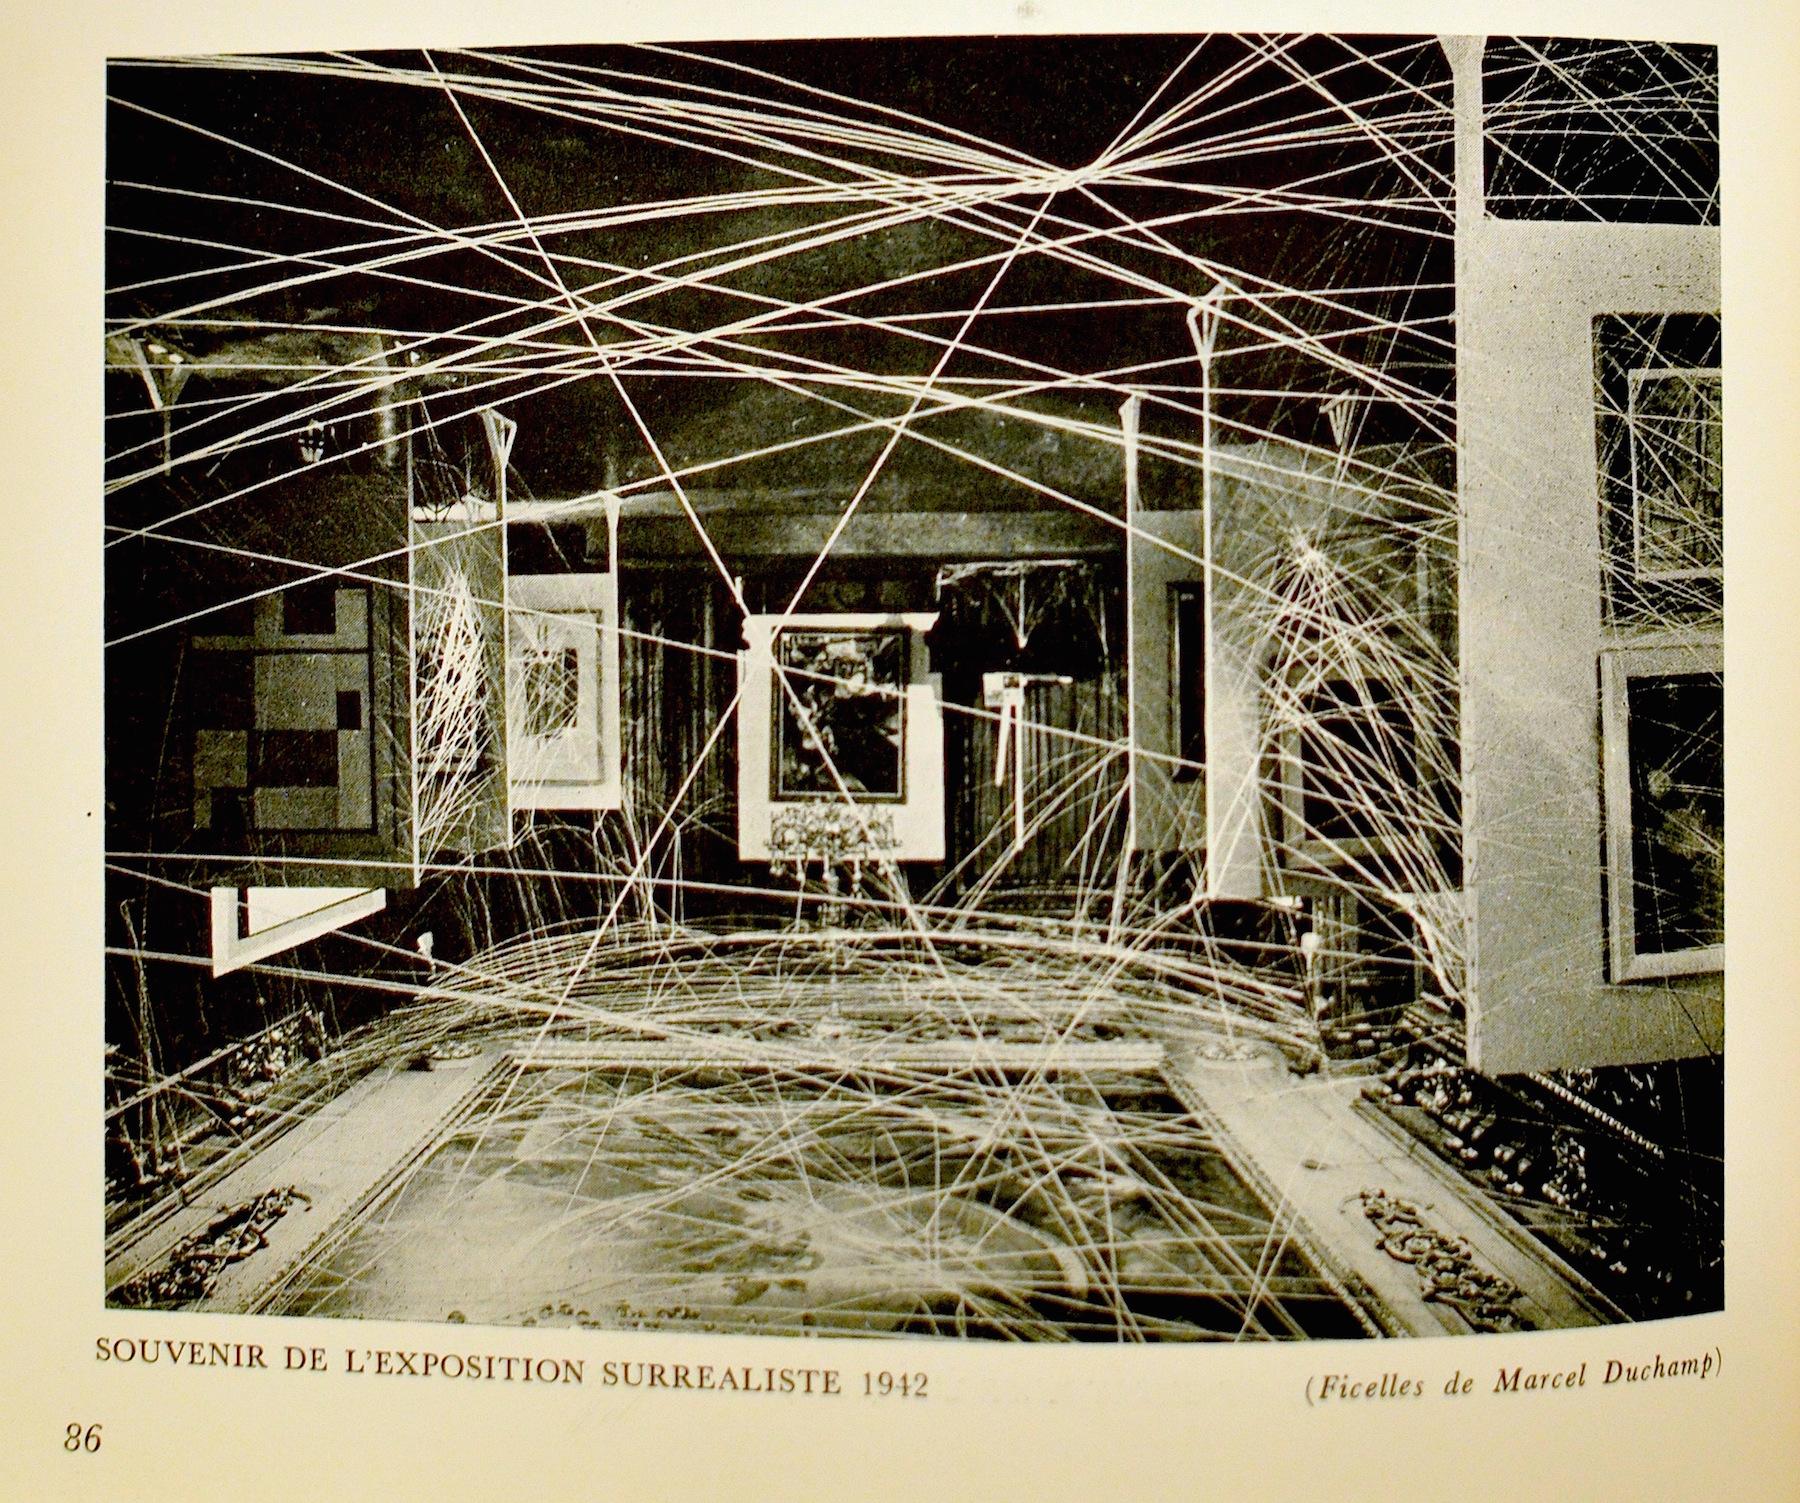 Marcel Duchamp's Guernica?: “His Twine,” the First Papers of Surrealism  (1942), and Aerial Warfare in Europe